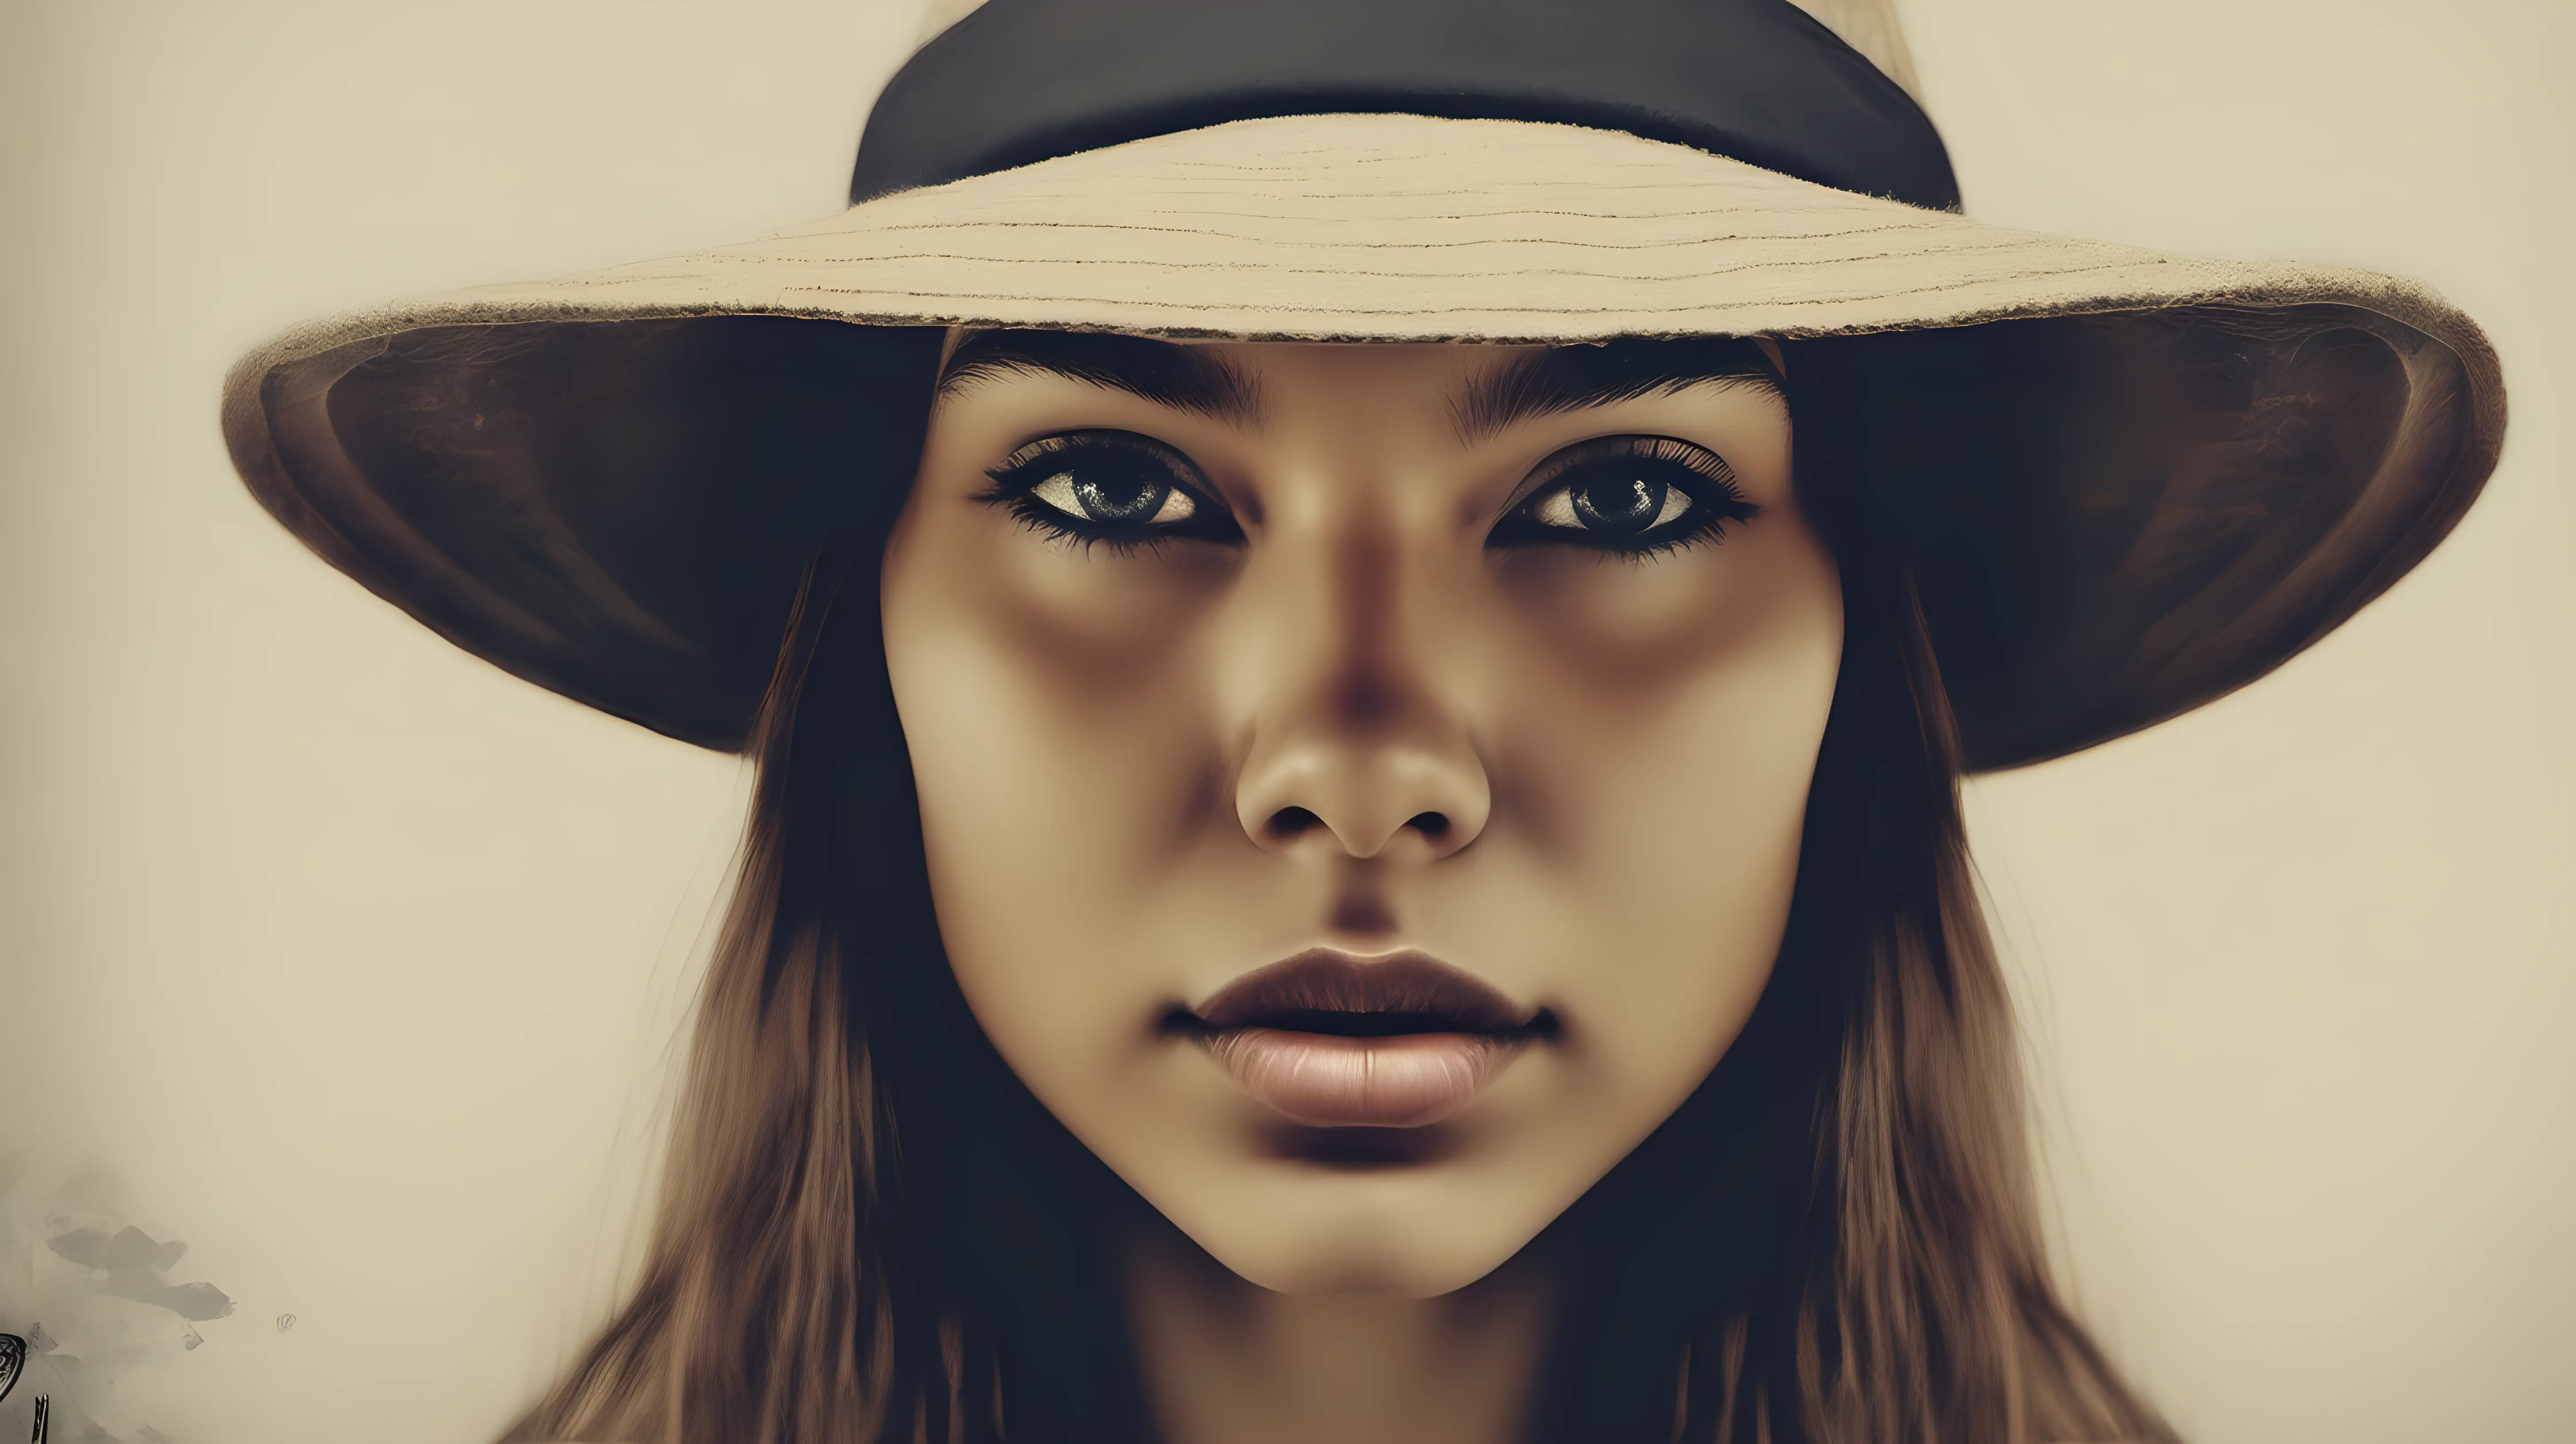 Contemporary Art Young Woman with Stylish Hat